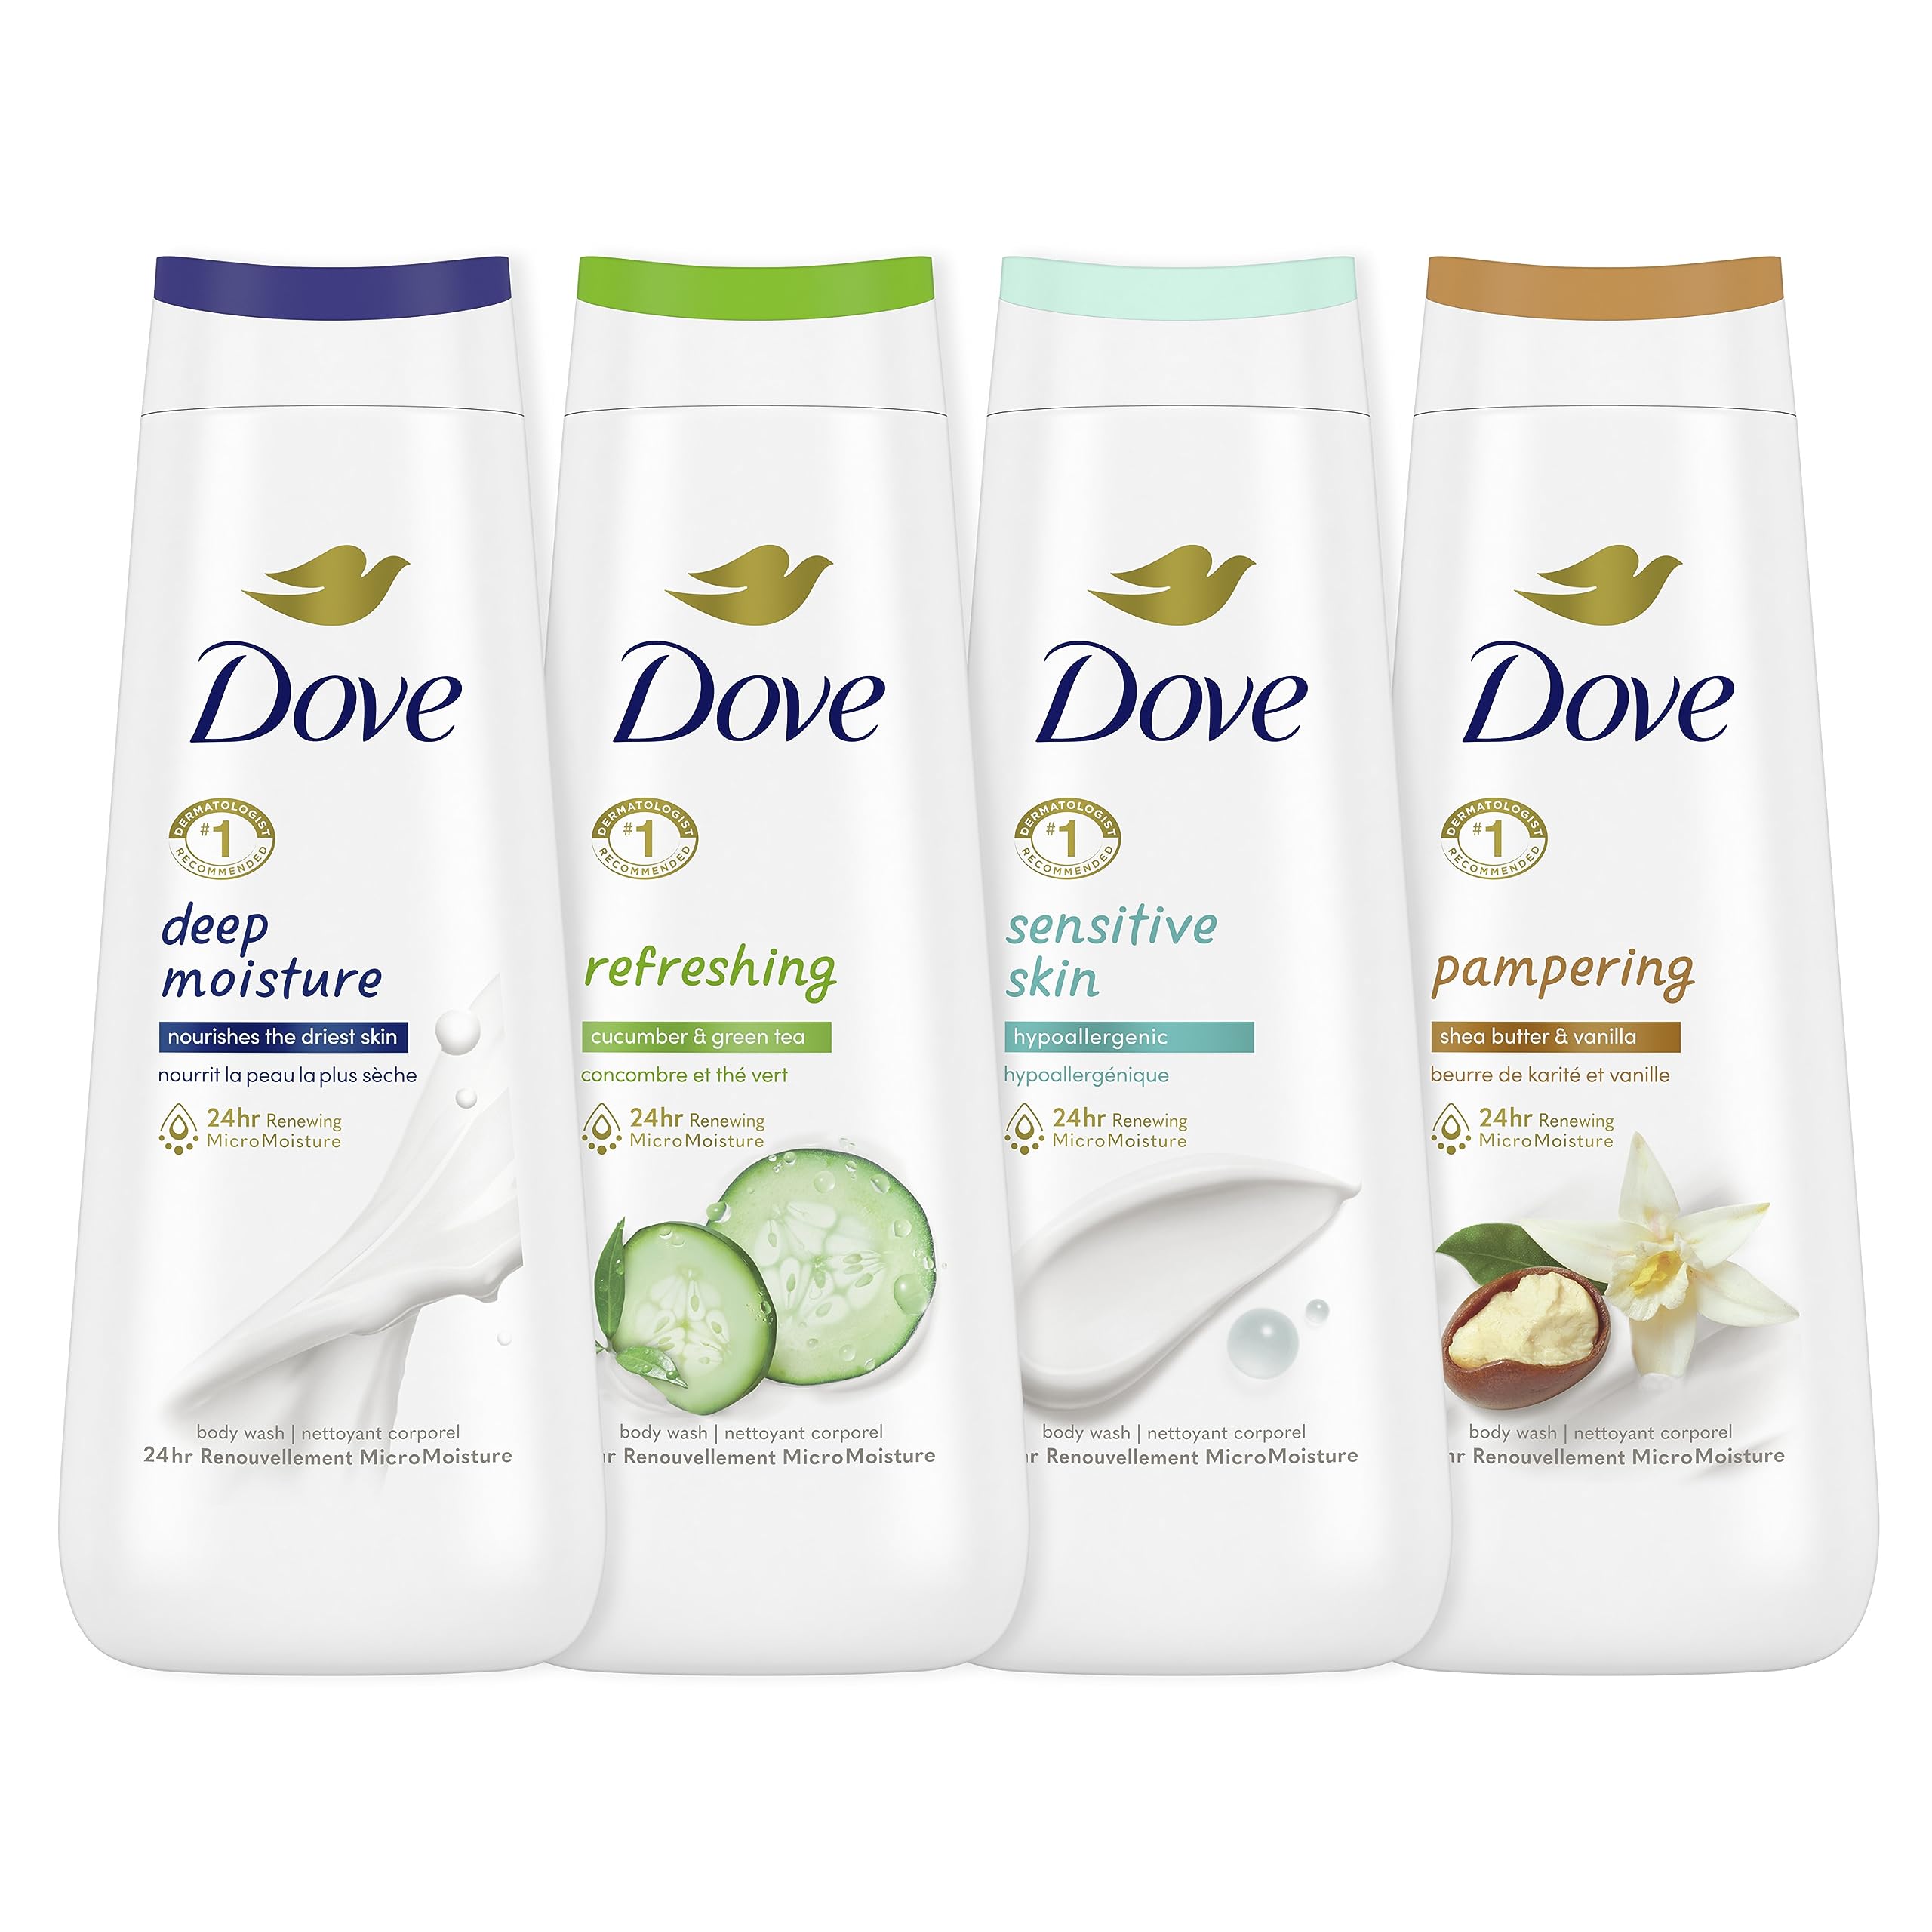 Dove Body Wash Deep Moisture, Sensitive Skin, Cucumber and Green Tea, and Shea Butter & Vanilla Collection 4 Count Skin Cleanser with 24hr Renewing MicroMoisture 20 oz